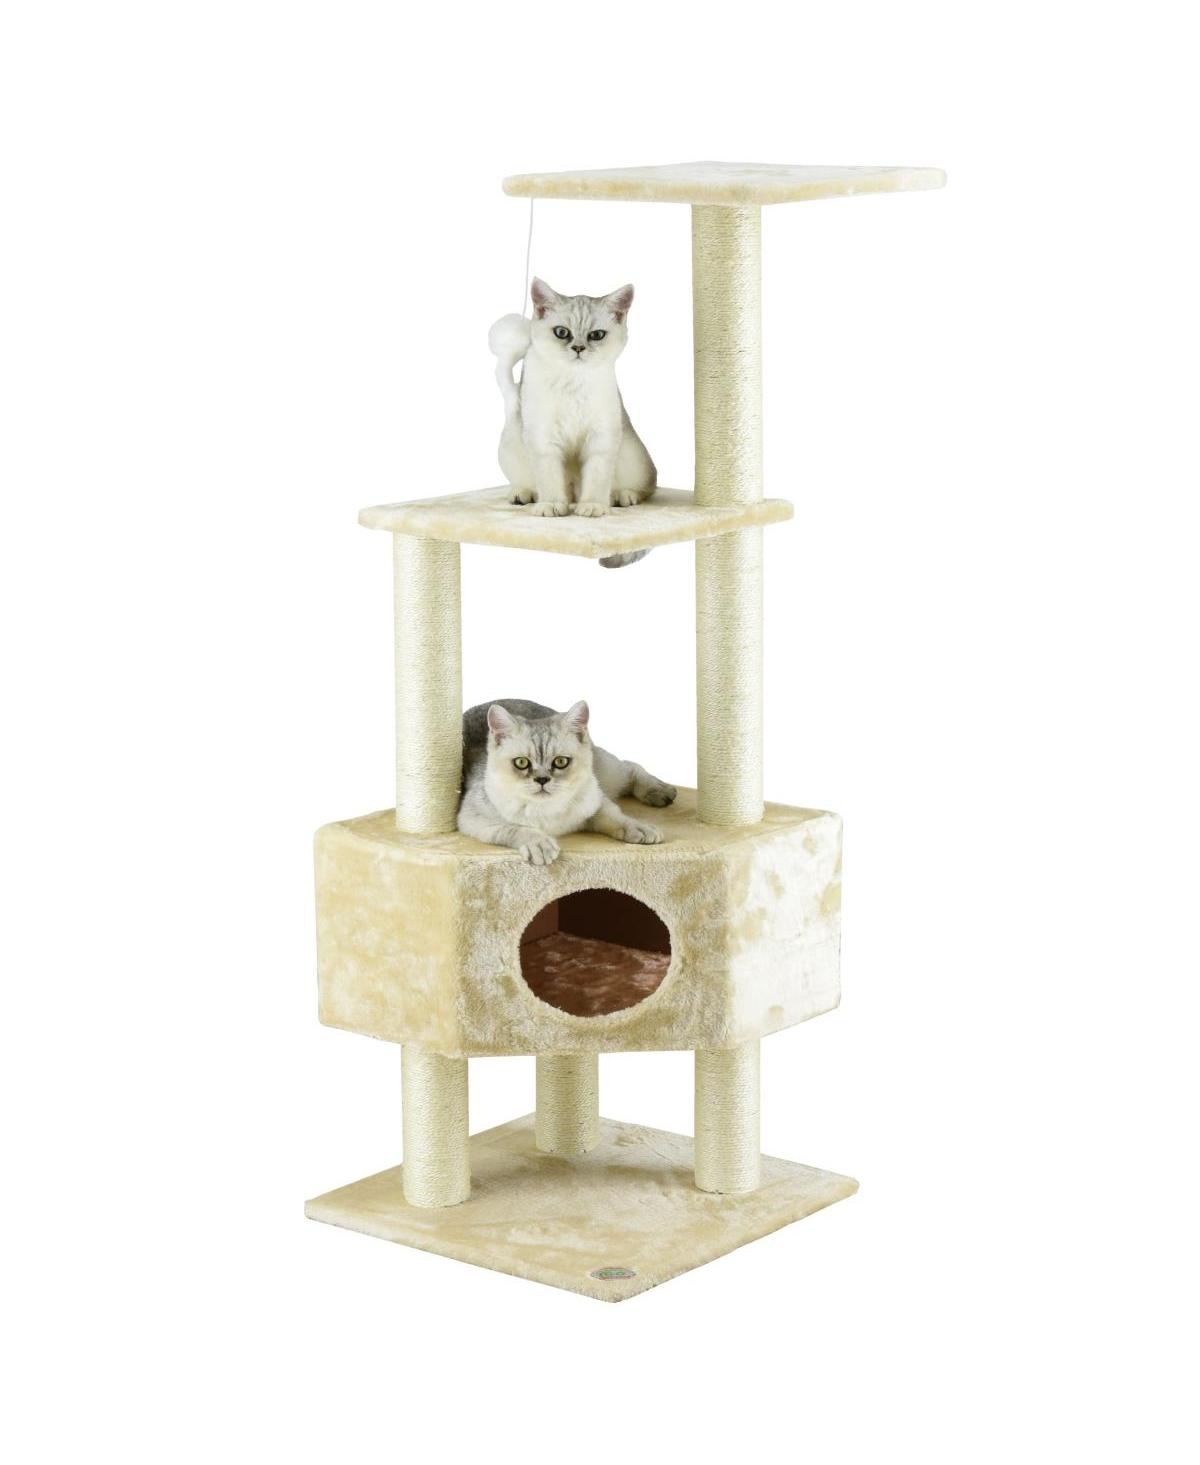 51 in. Classic Cat Tree Furniture with Sisal Covered Posts - Open miscellaneous